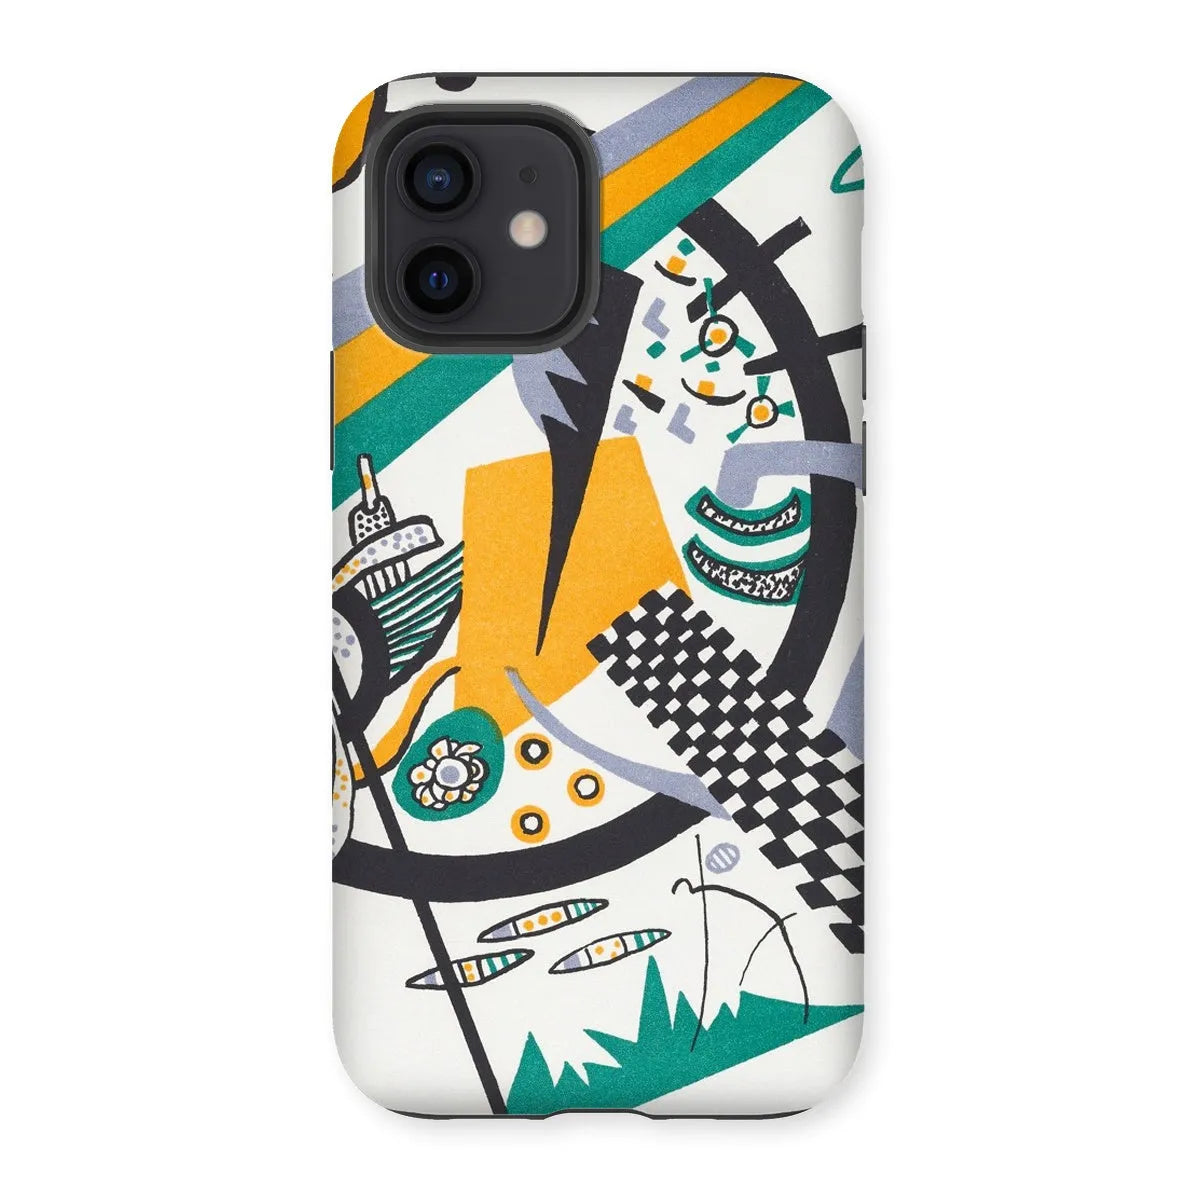 Small Worlds Iv - Expressionist Phone Case - Wassily Kandinsky - Iphone 12 / Matte - Mobile Phone Cases - Aesthetic Art